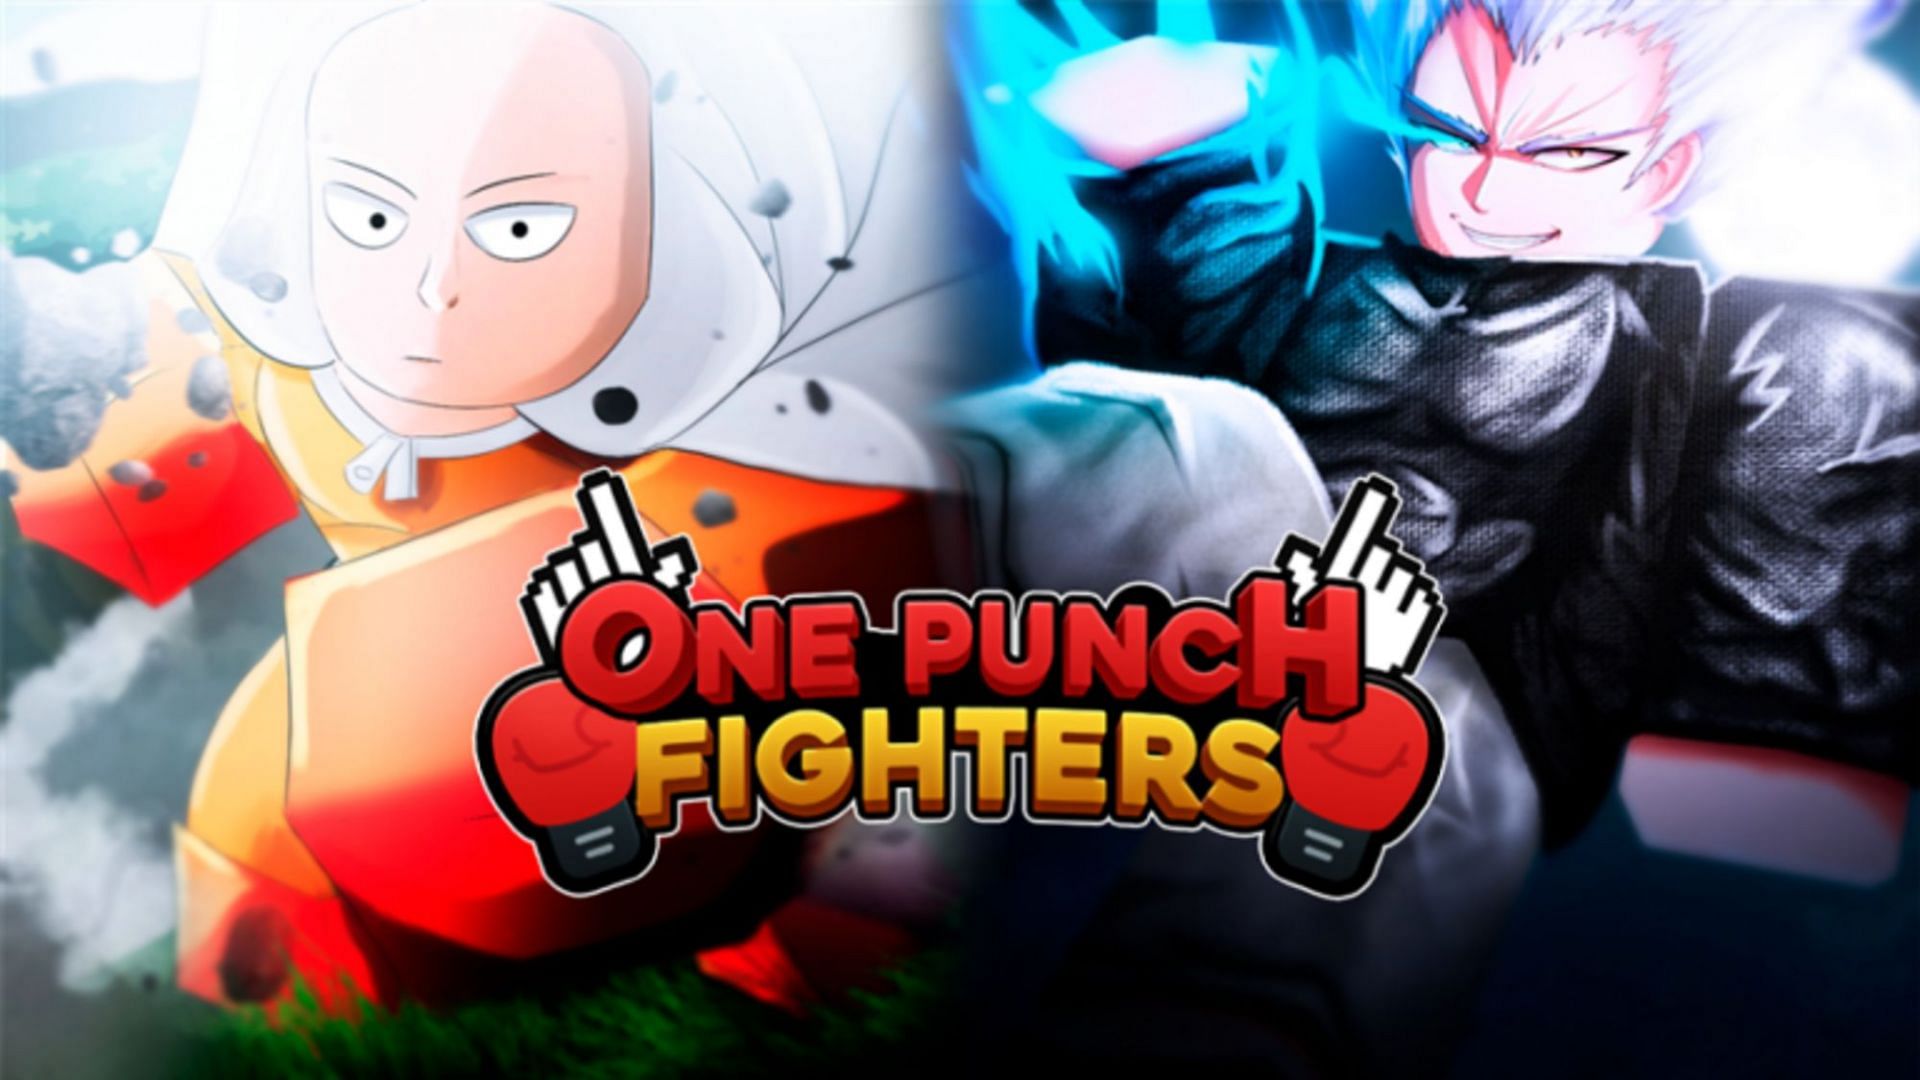 Learn to kill enemies with one punch (Image via Roblox)